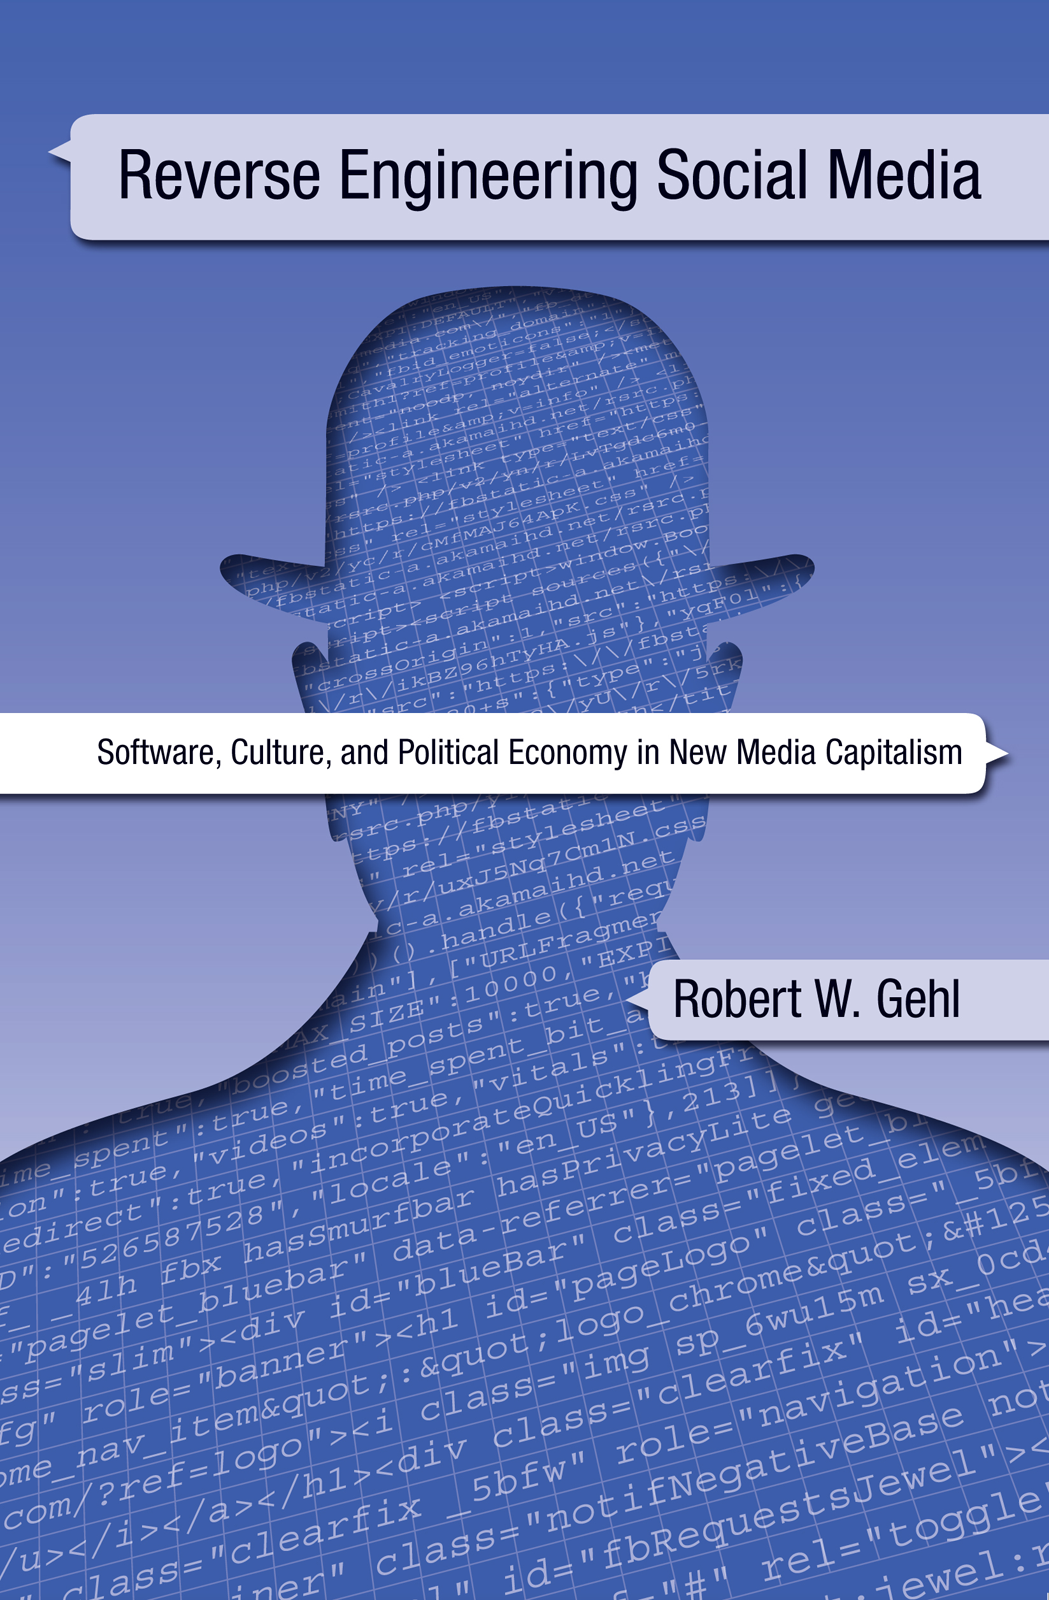 The cover of Reverse Engineering Social Media, a book by Robert W. Gehl